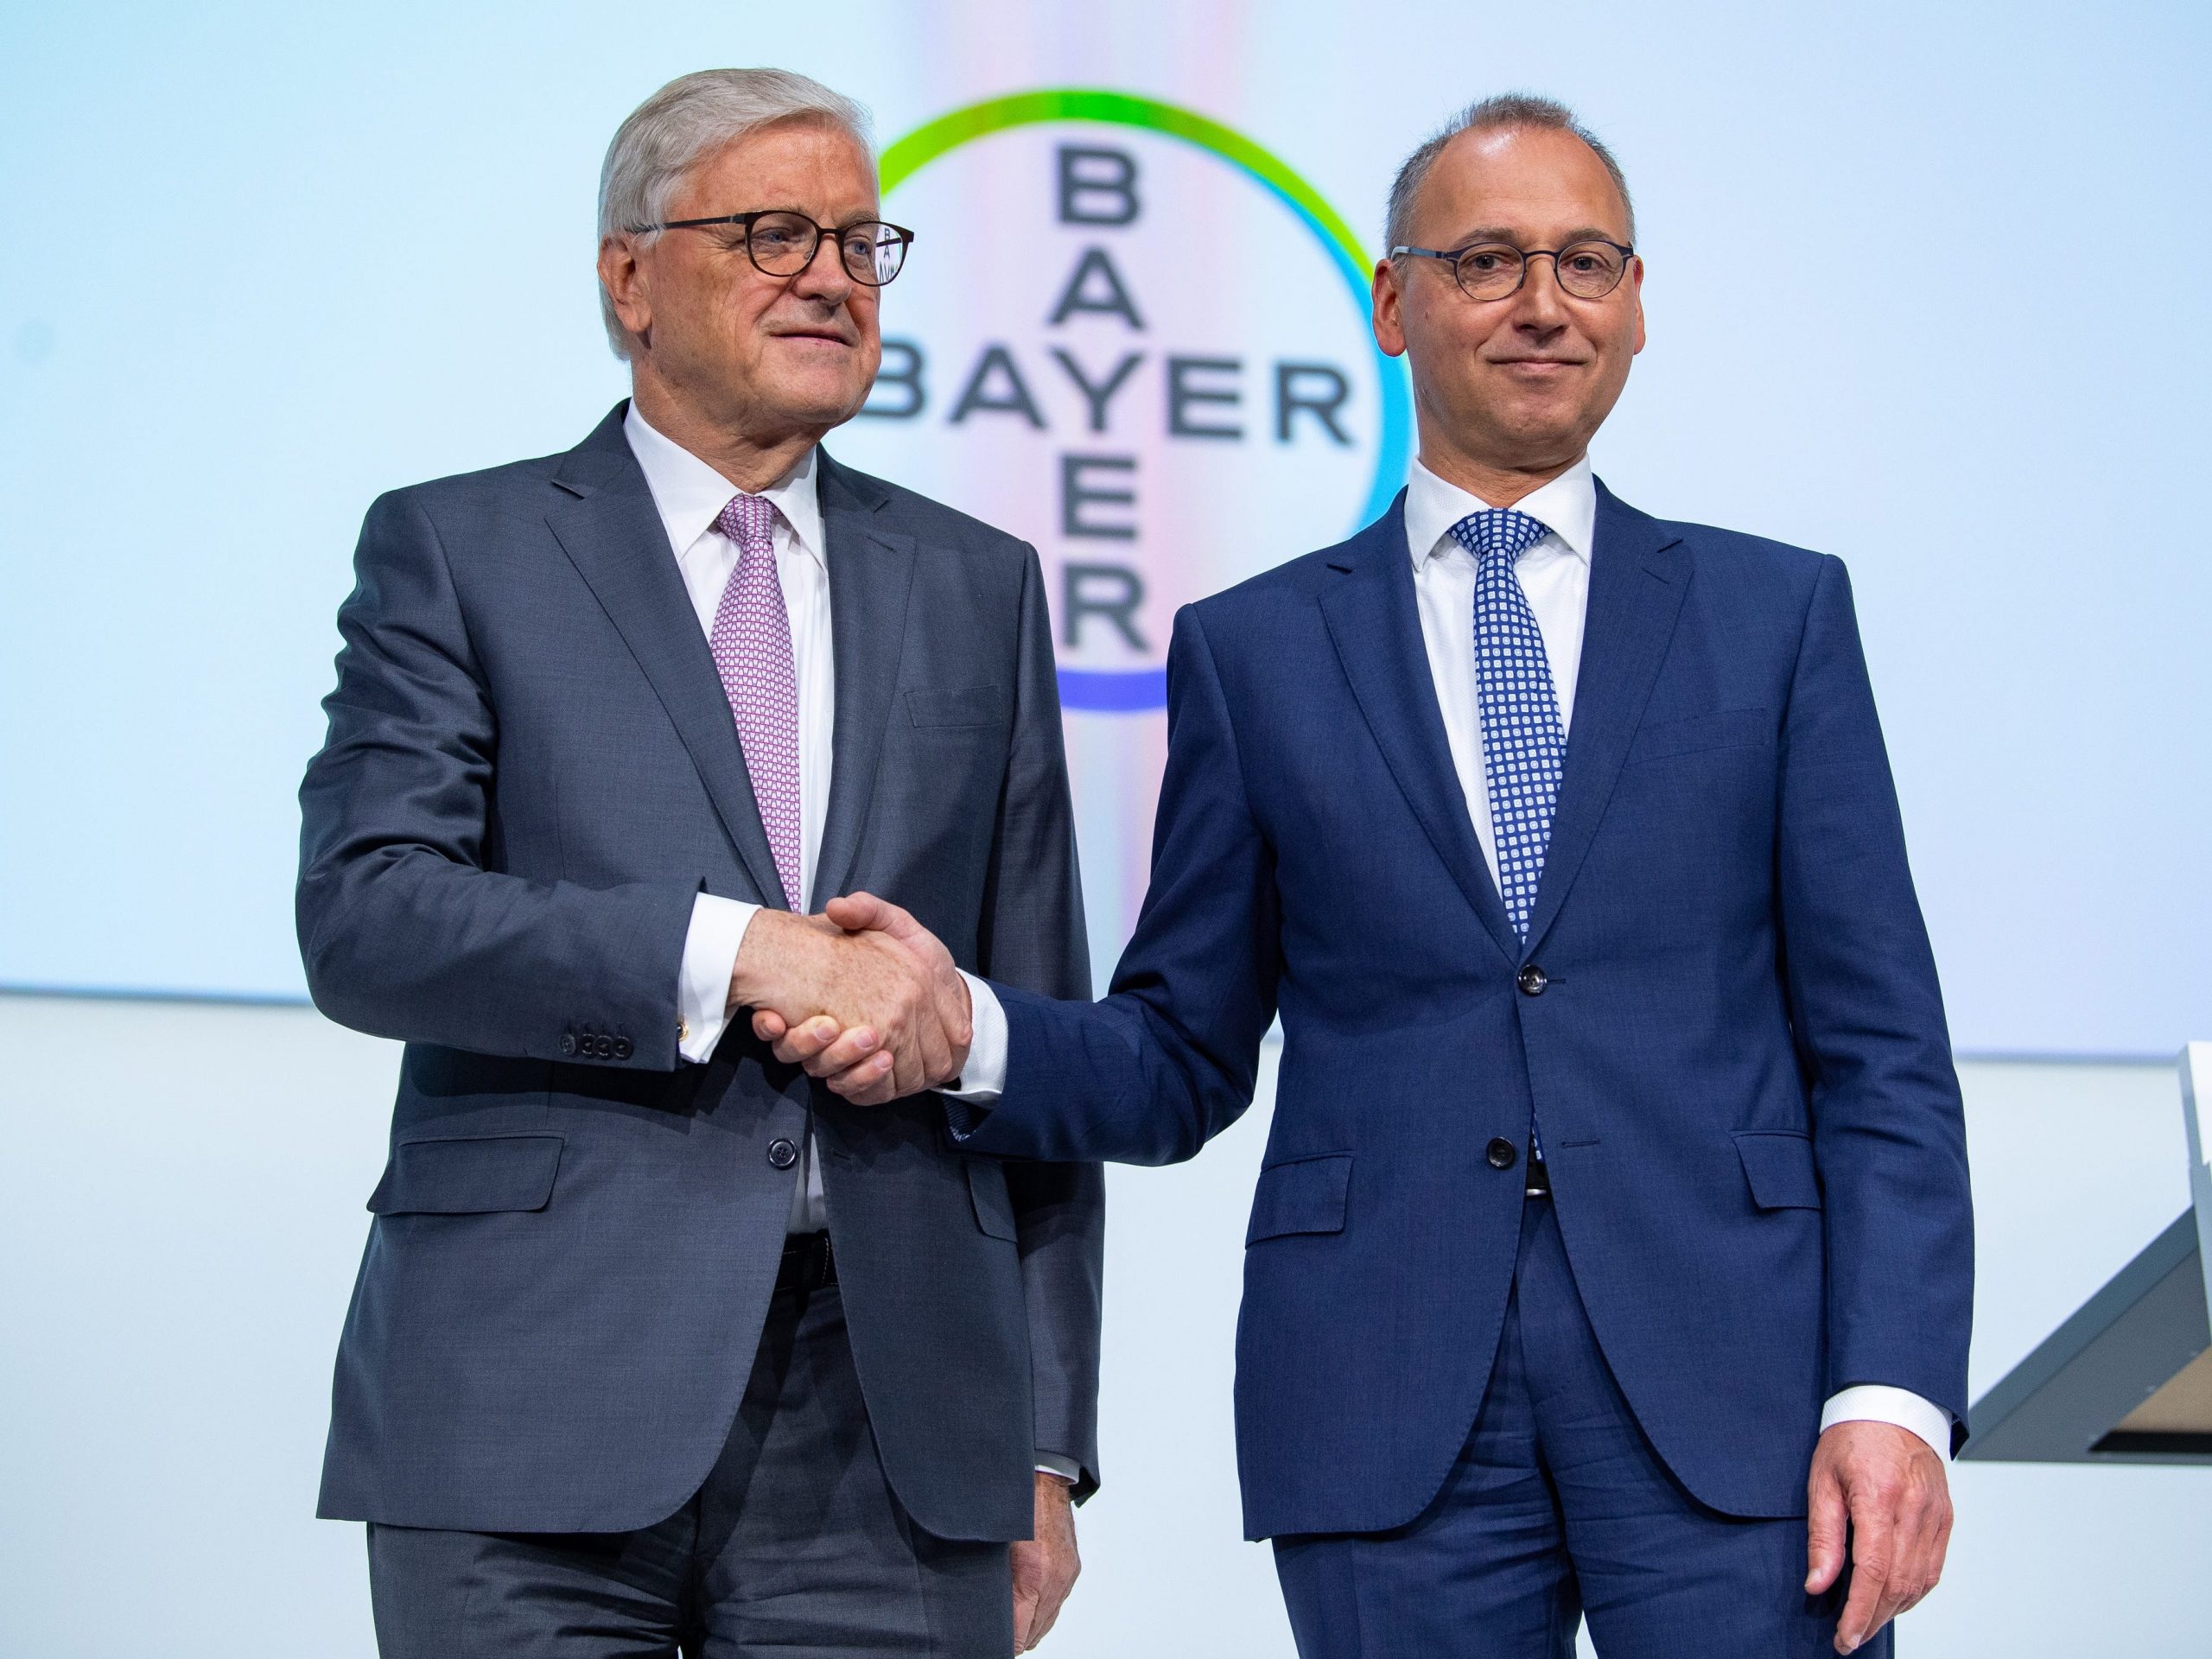 Werner Baumann, Chairman of the Board of Management of Bayer AG, and Werner Wenning, Chairman of the Supervisory Board of Bayer AG, stand on stage at the Bayer Annual Stockholders' Meeting and shake hands.